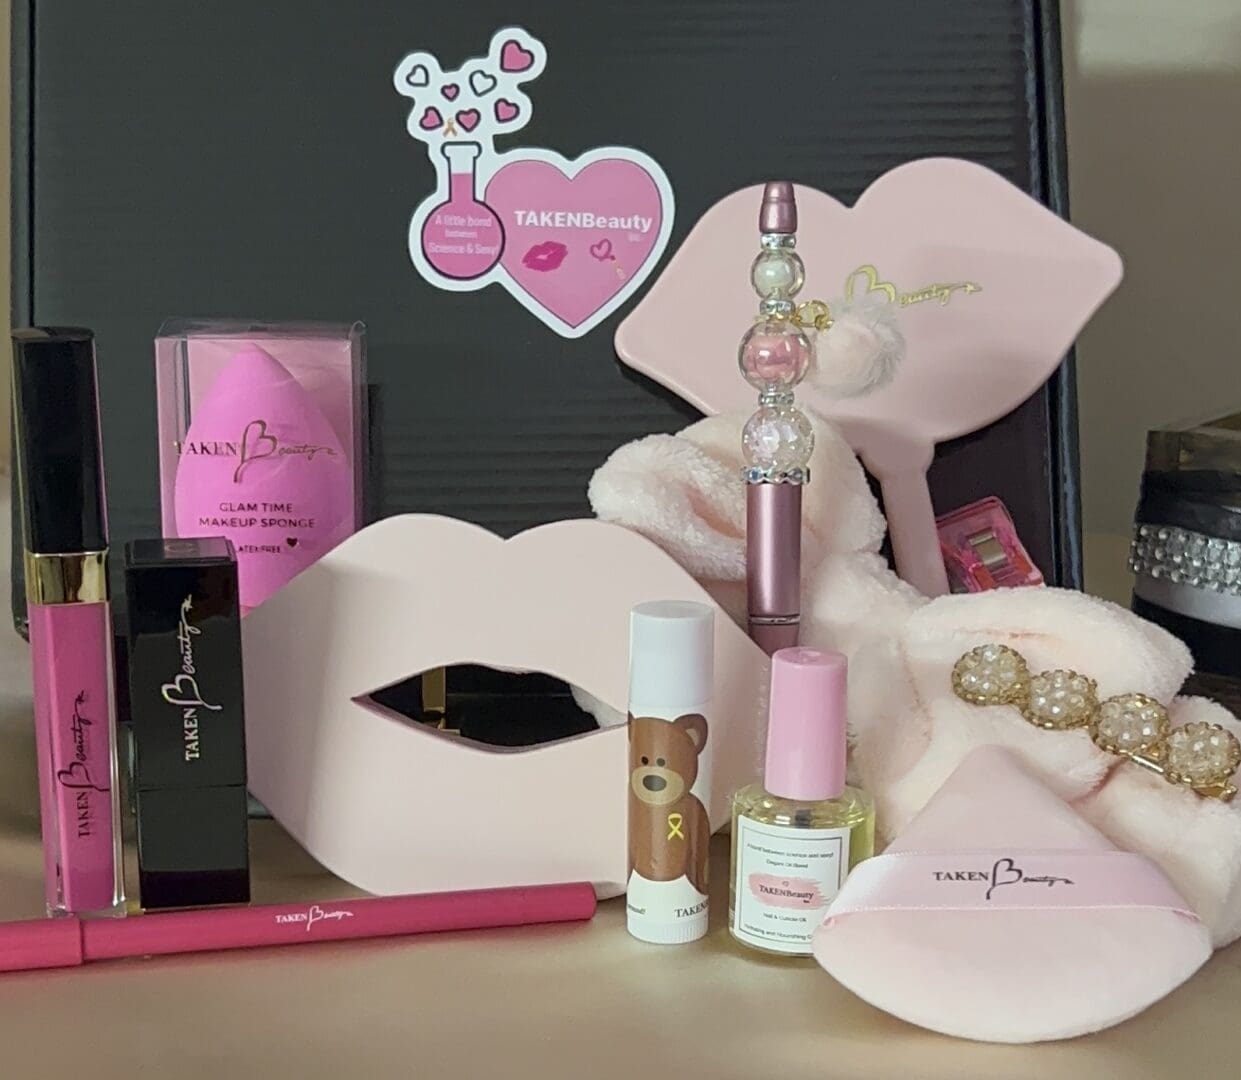 A table with some pink lipstick and other items